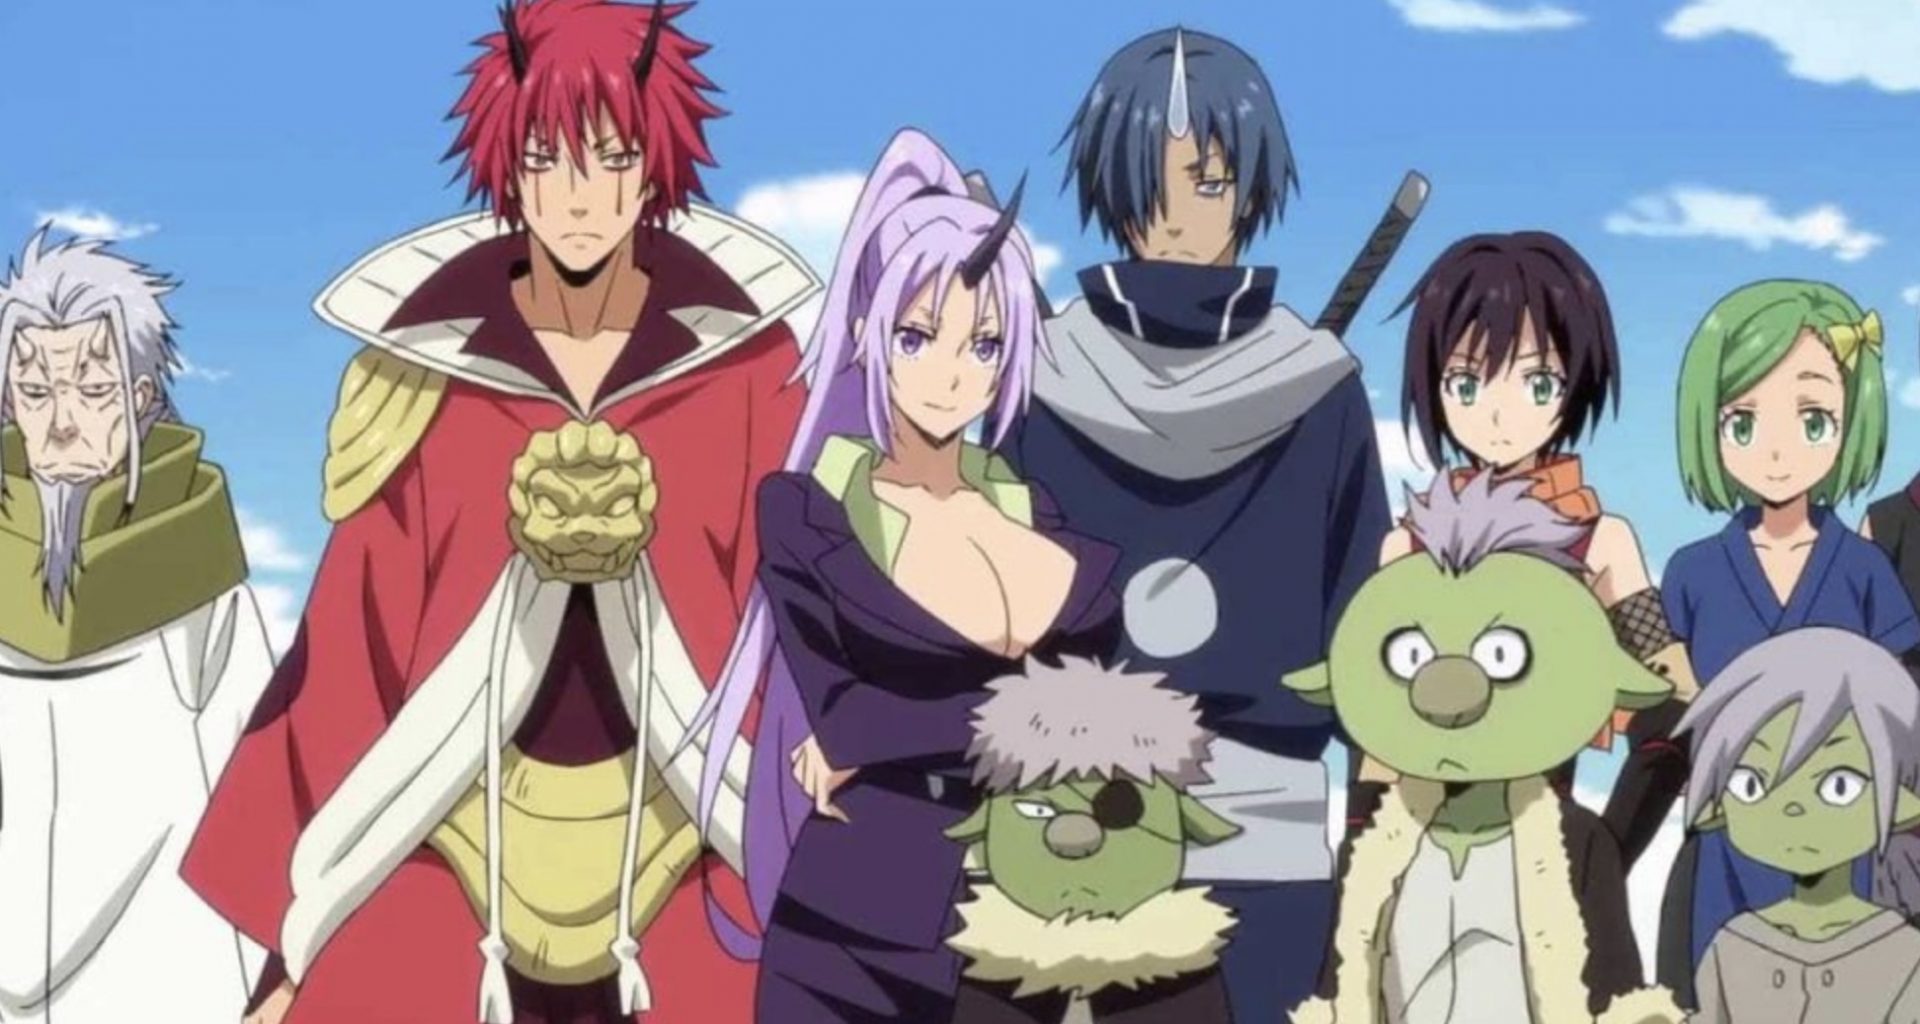 That Time I Got Reincarnated As A Slime Episode 44 Release Date